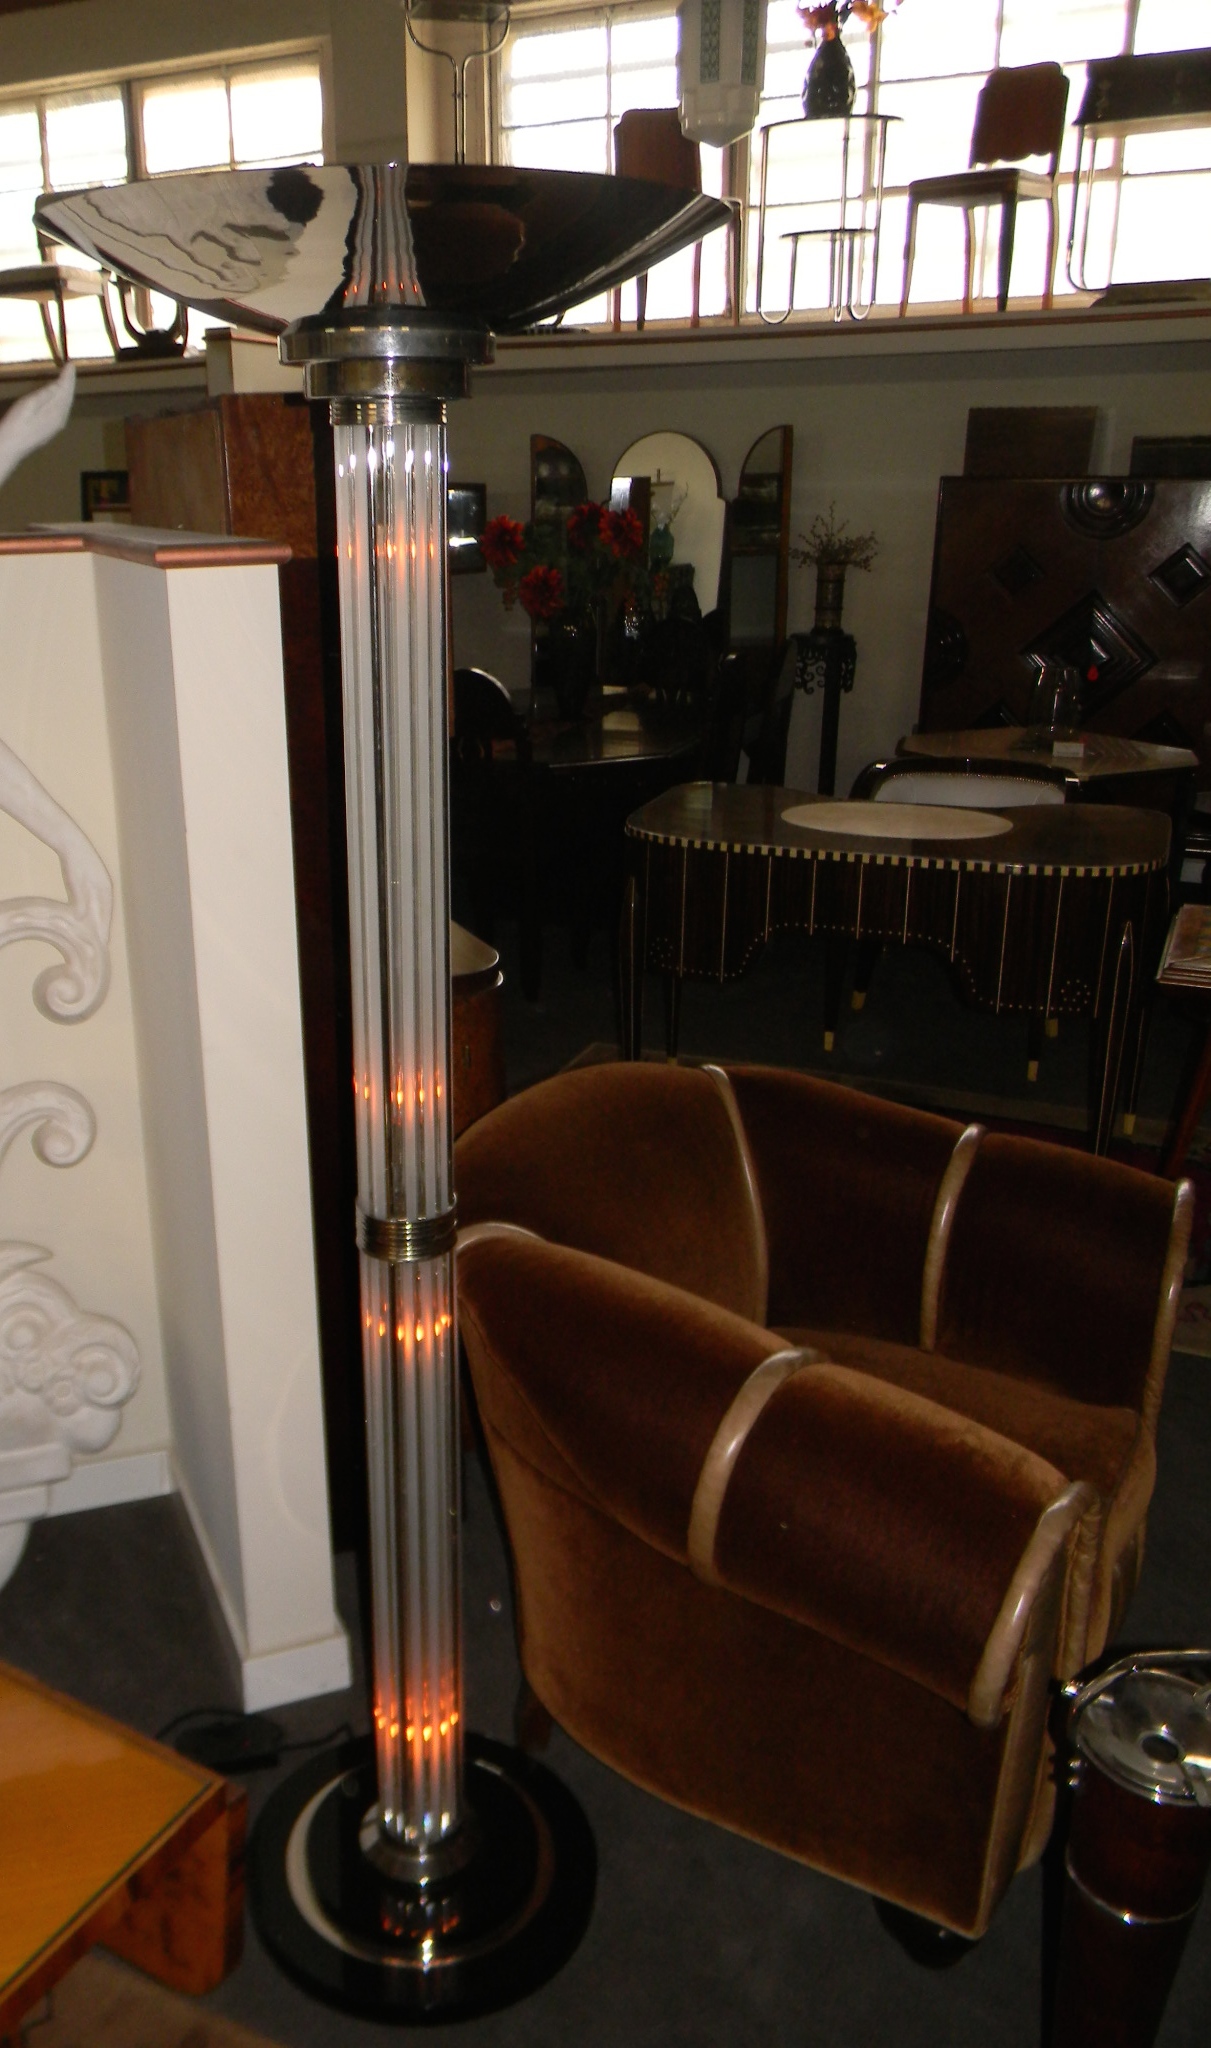 Stunning Art Deco Floor Lamp with glass rods and lights | Floor Lamps